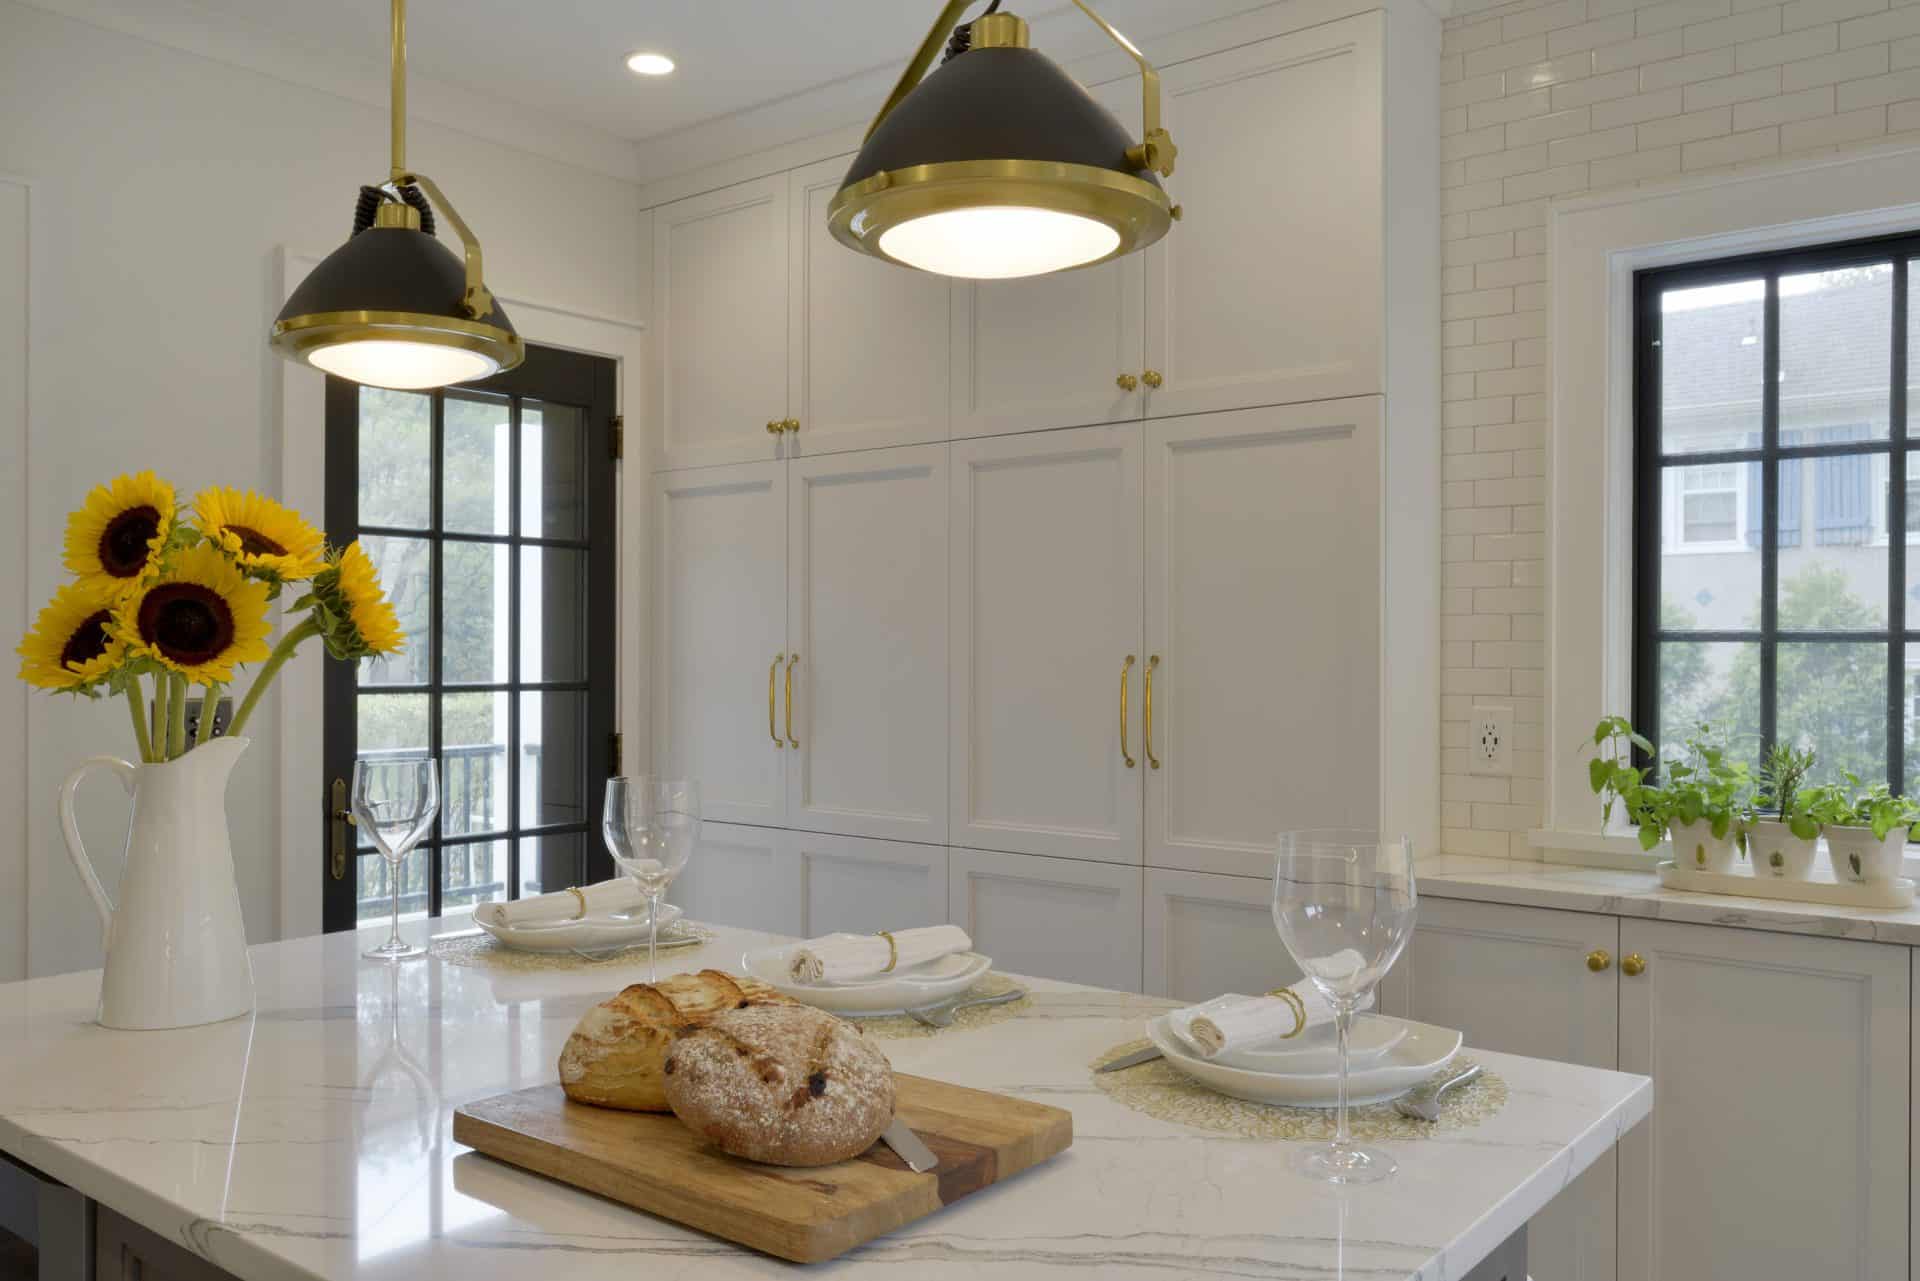 Mount Kisco Kitchen features white NAC cabinets, black window frames and ba\lack and brass accents.